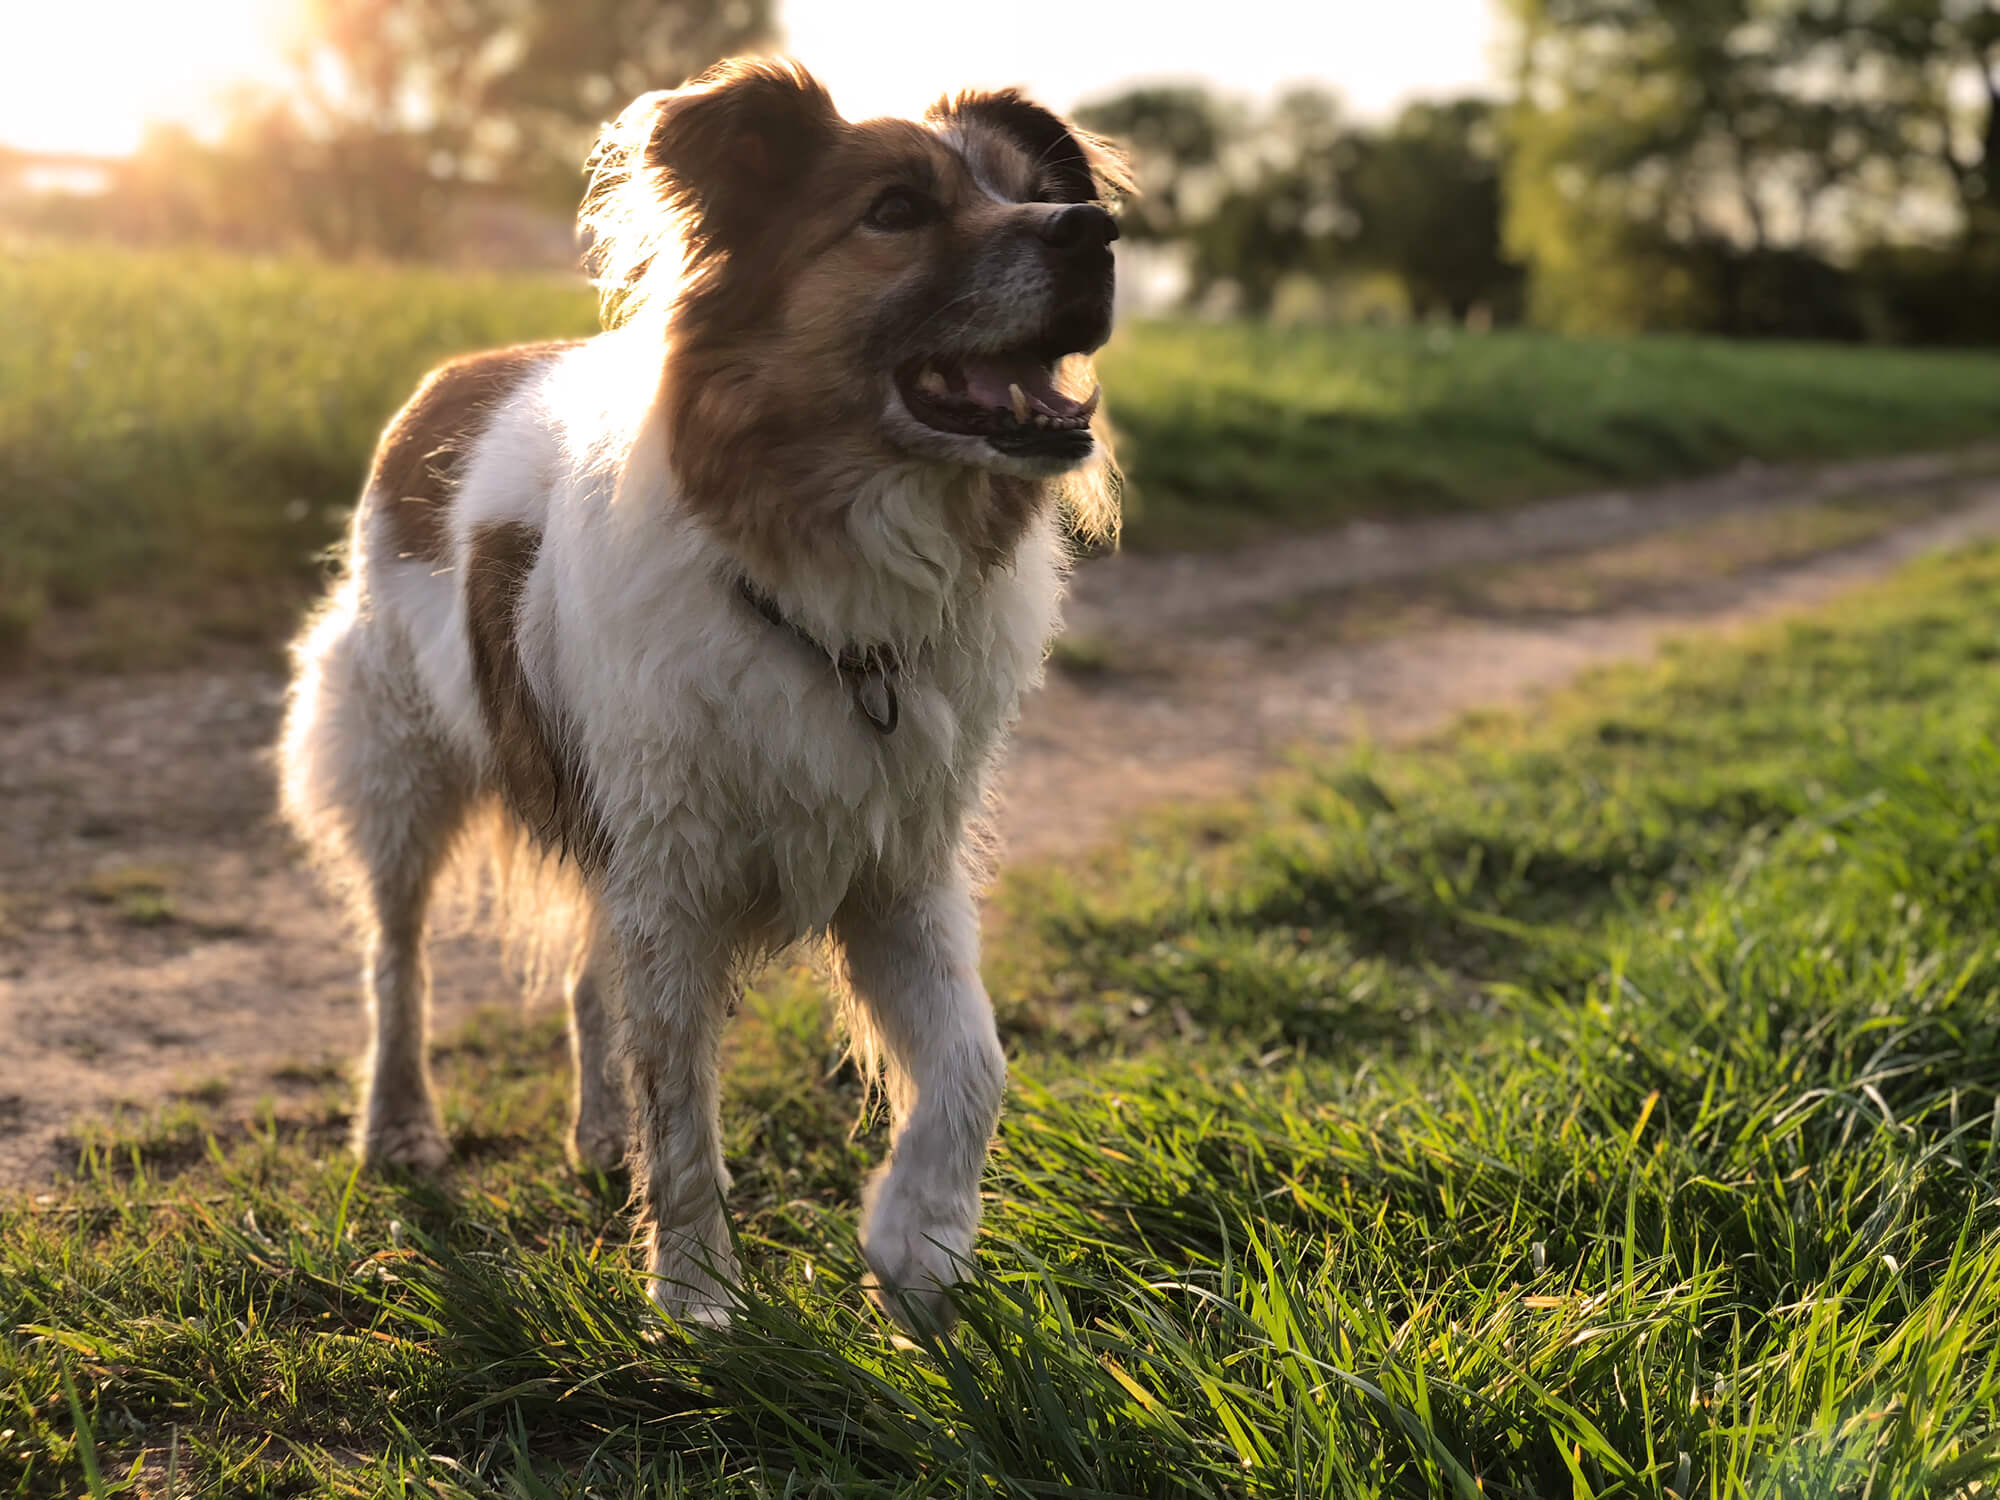 Niko, backlit by the setting sun, is attentively looking past the camera – probably at a food source